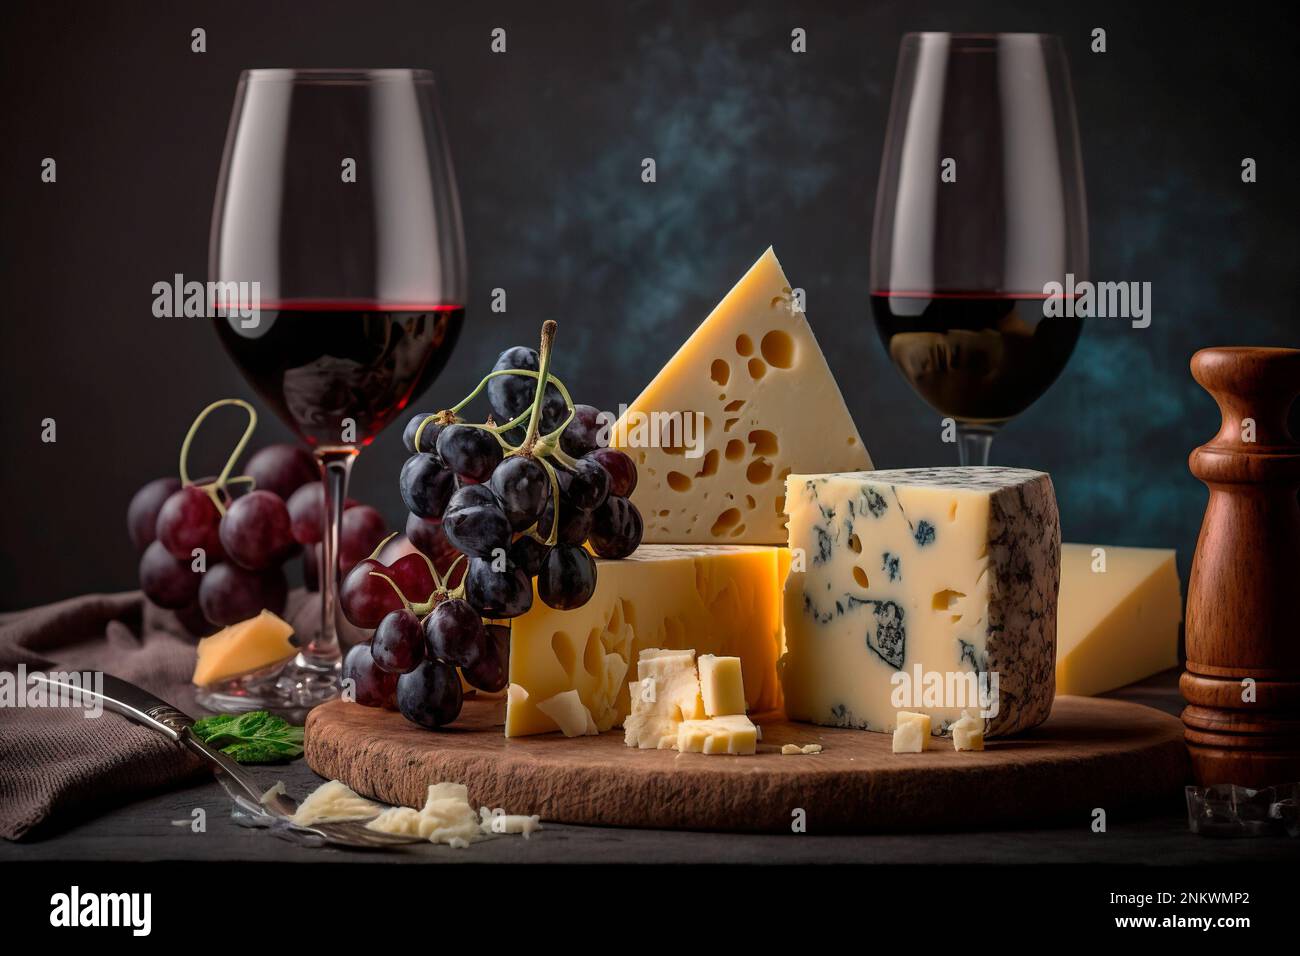 Perfect Pairings: An Assortment of Cheeses, Grapes, and Red Wine on a Platter.Image generated by AI Stock Photo